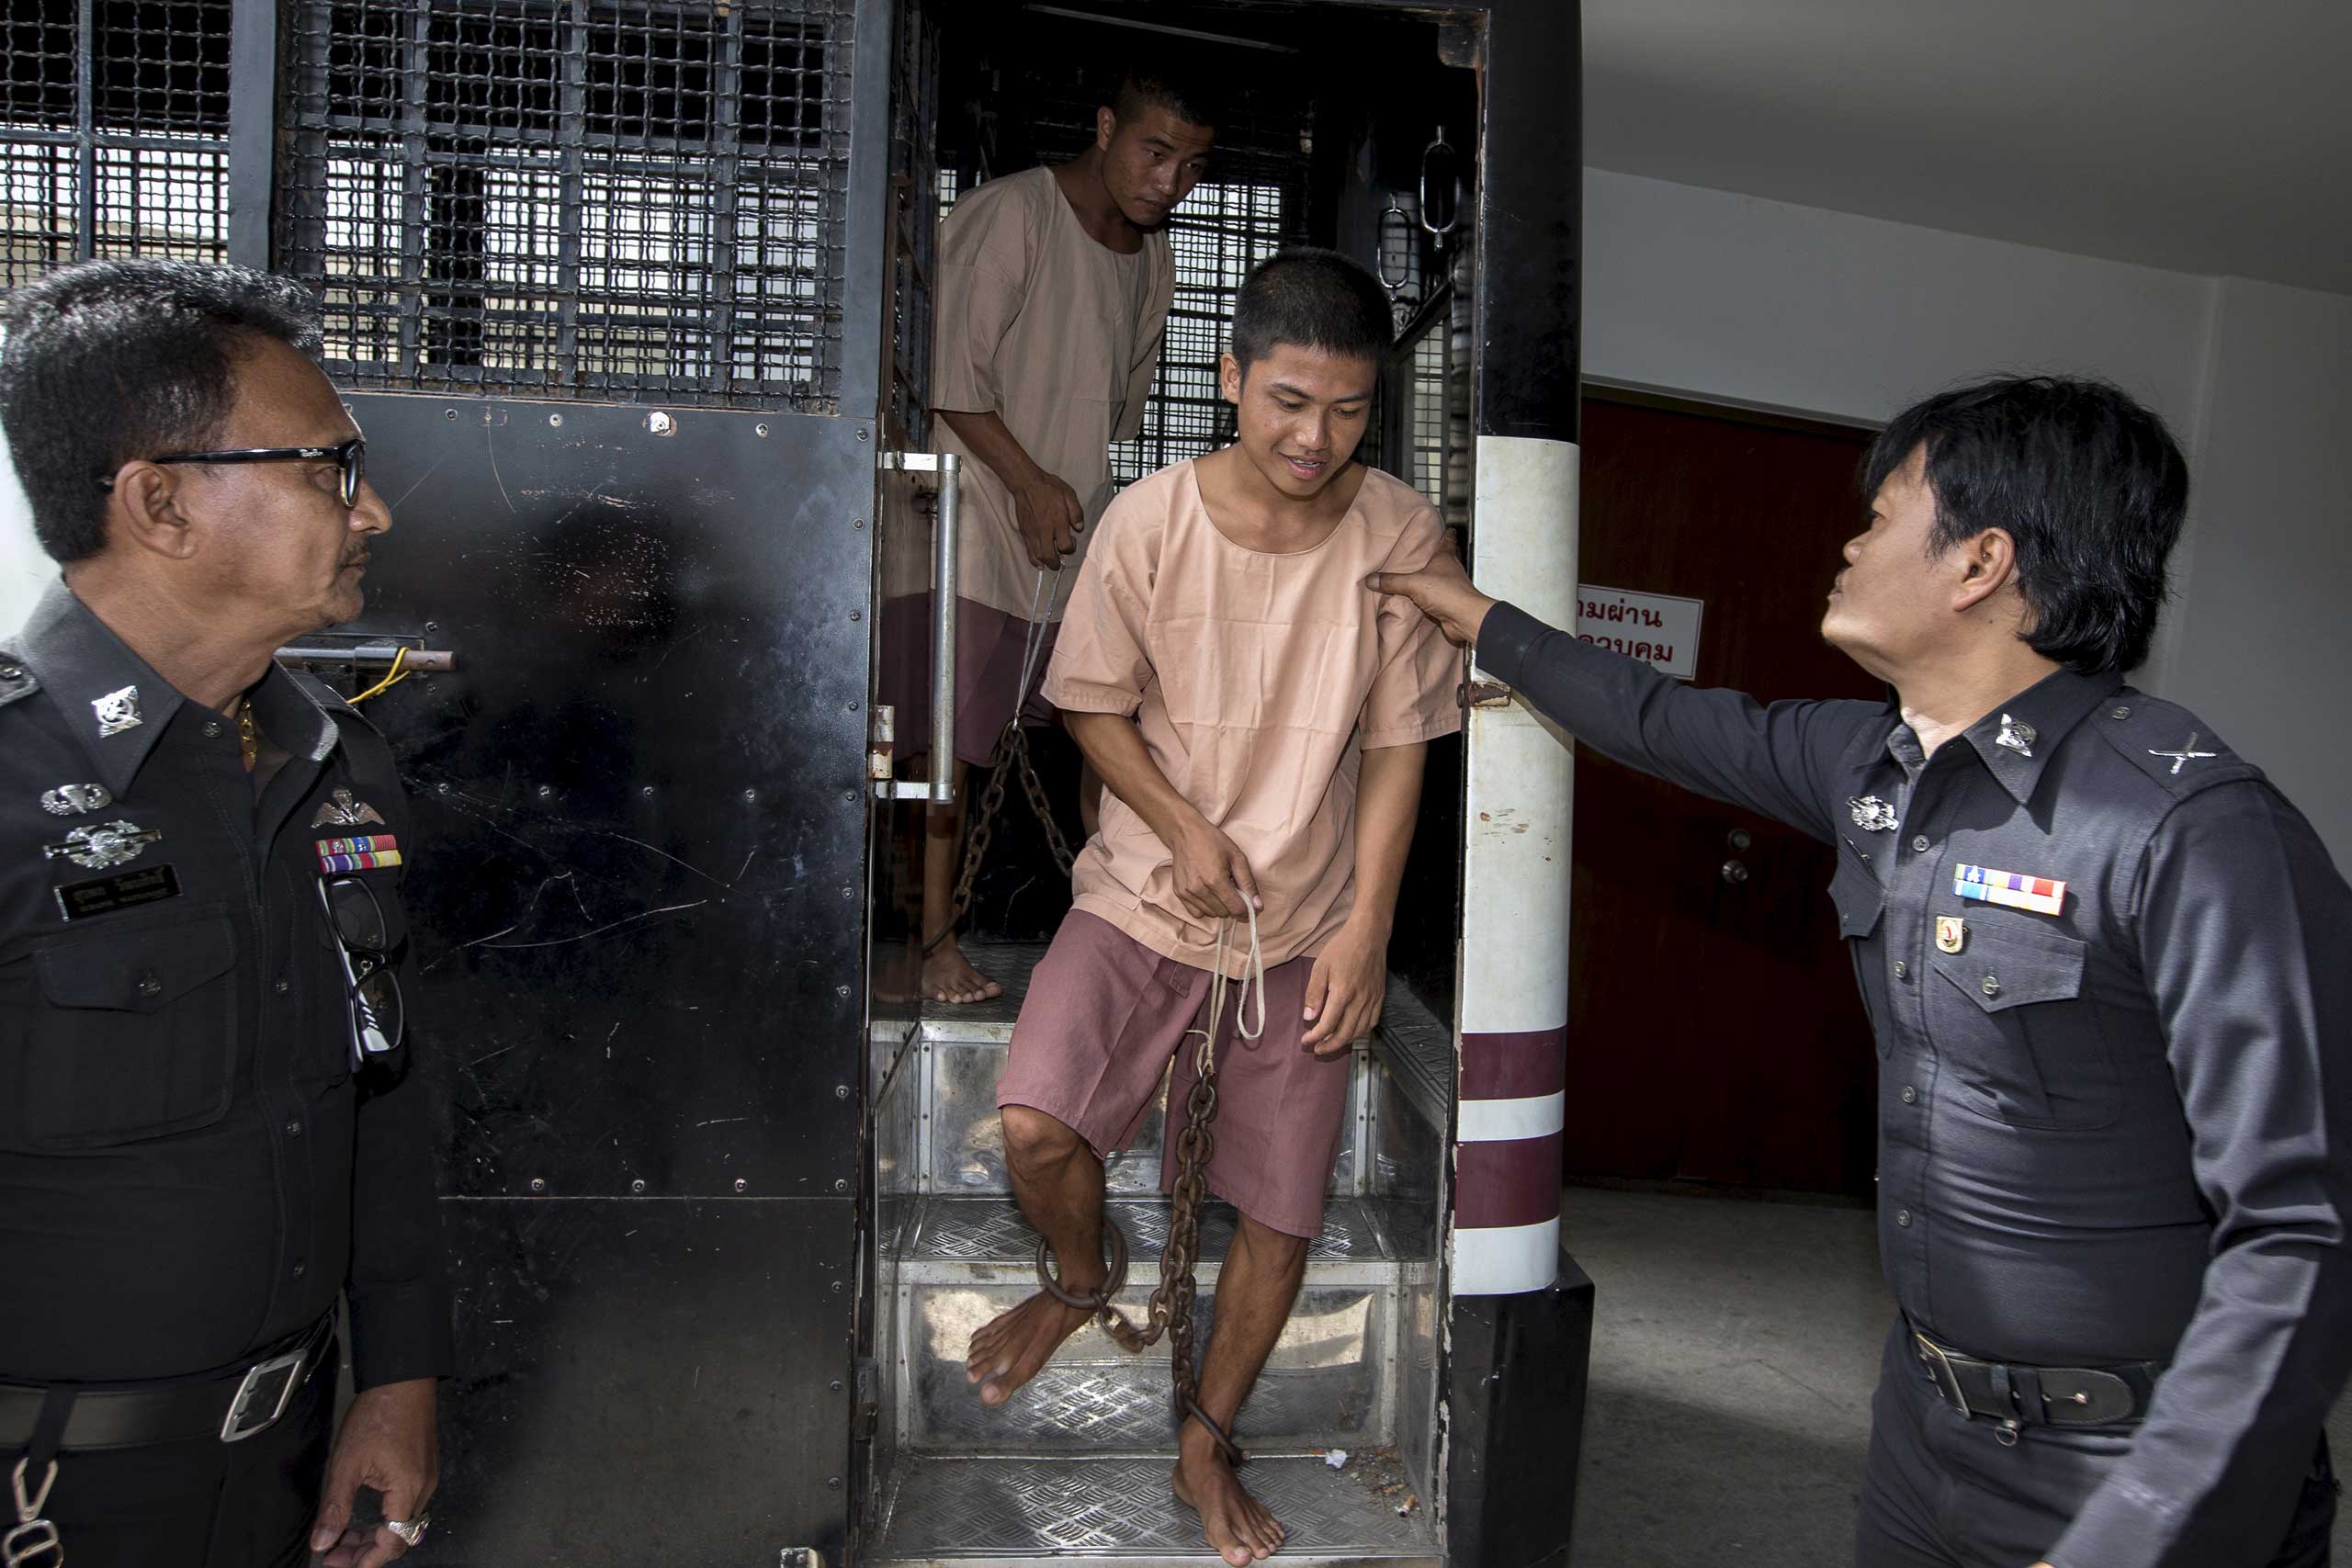 Burmese migrant workers Wai Phyo and Zaw Lin arrive at the Koh Samui Provincial Court, in Koh Samui, Thailand, on July 8, 2015 (Athit Perawongmetha—Reuters)